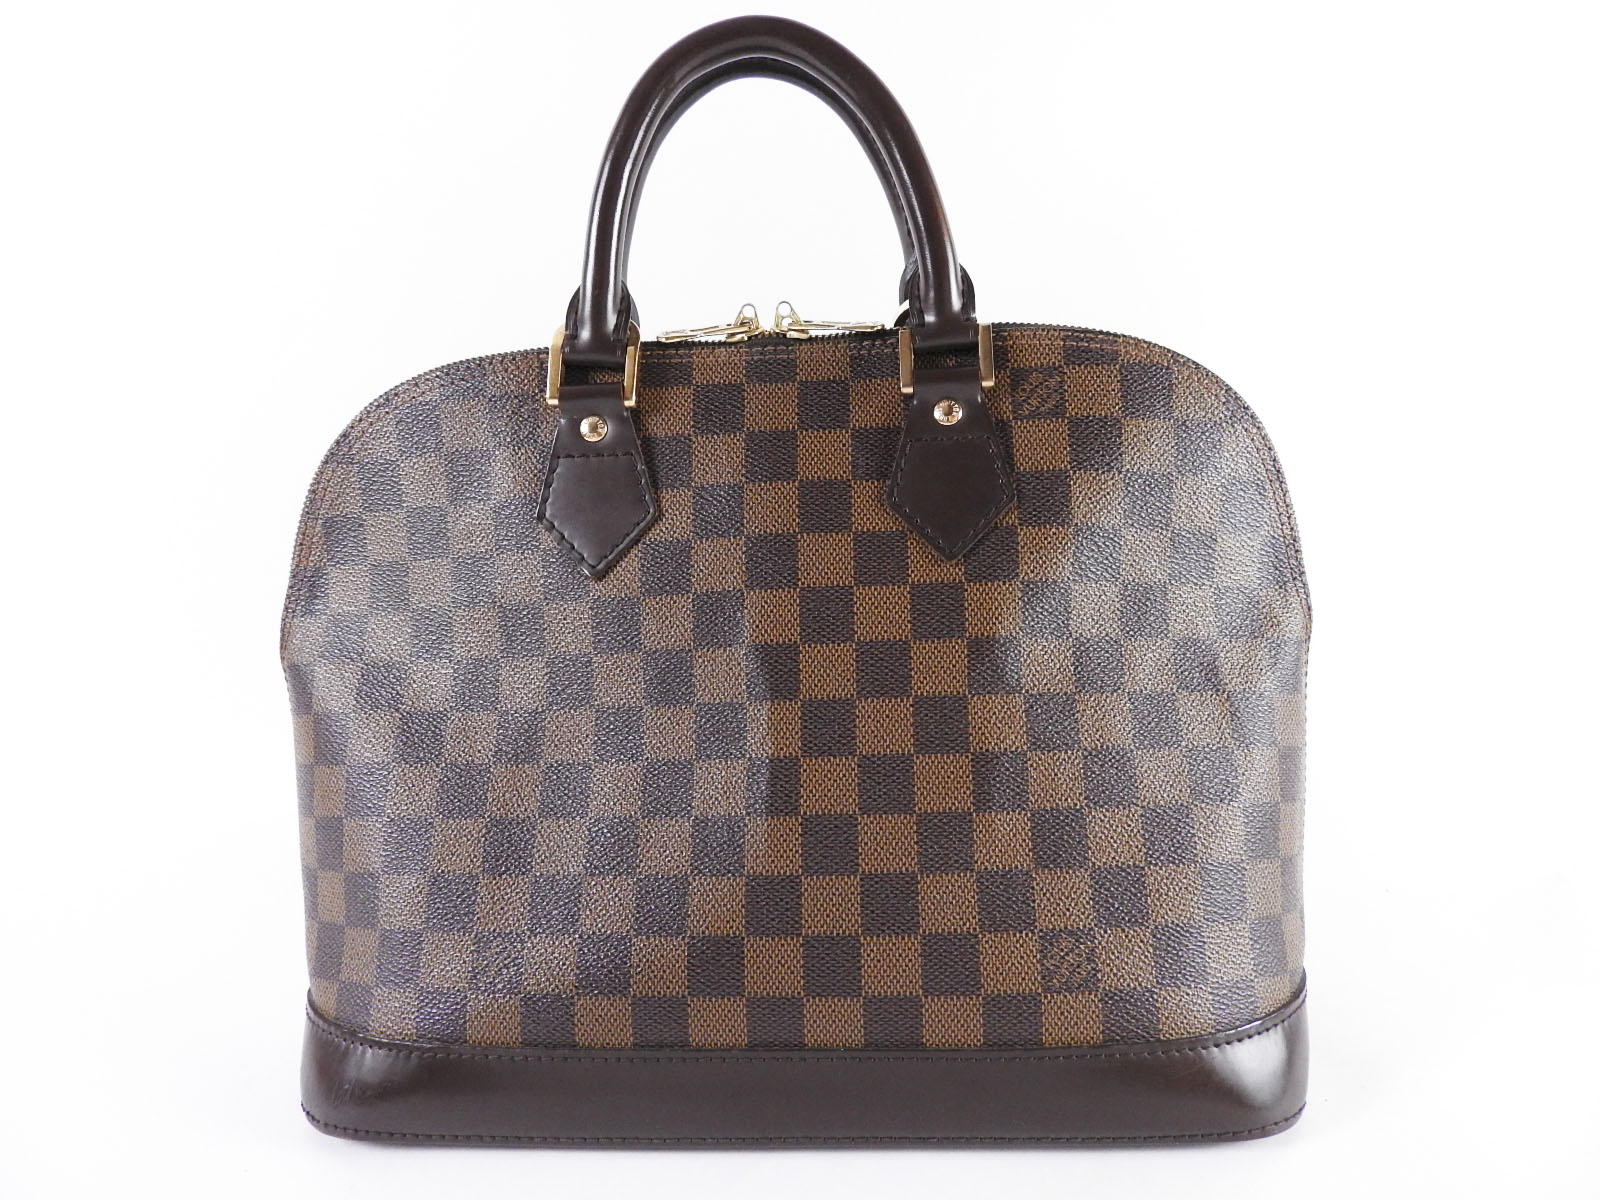 Louis Vuitton Alma Size Cm | Confederated Tribes of the Umatilla Indian Reservation